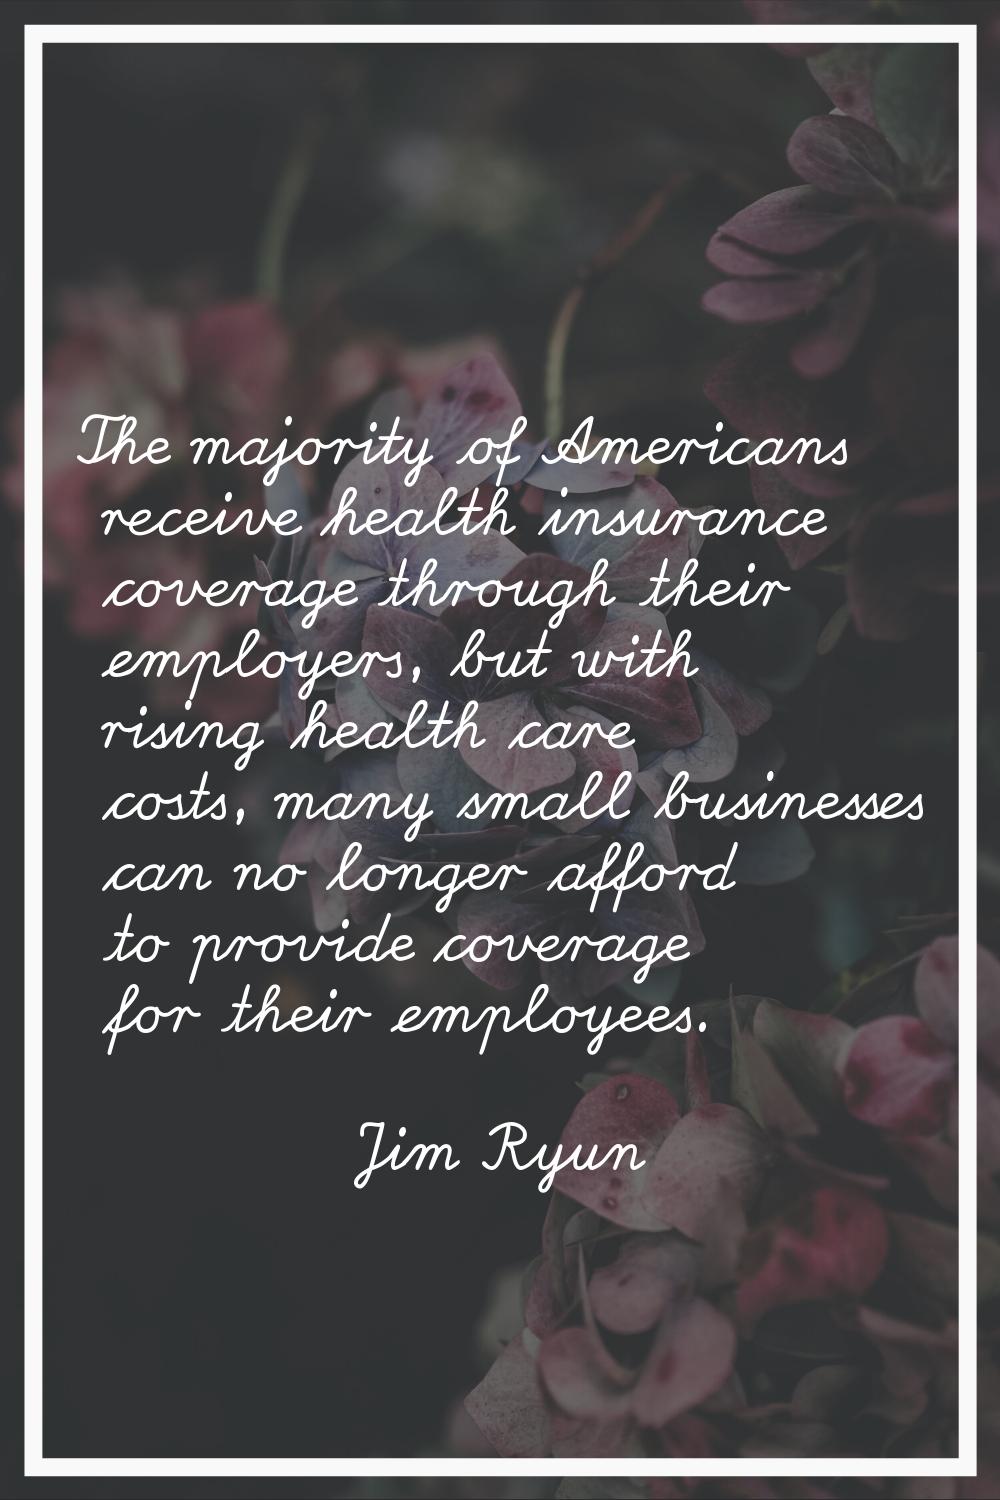 The majority of Americans receive health insurance coverage through their employers, but with risin